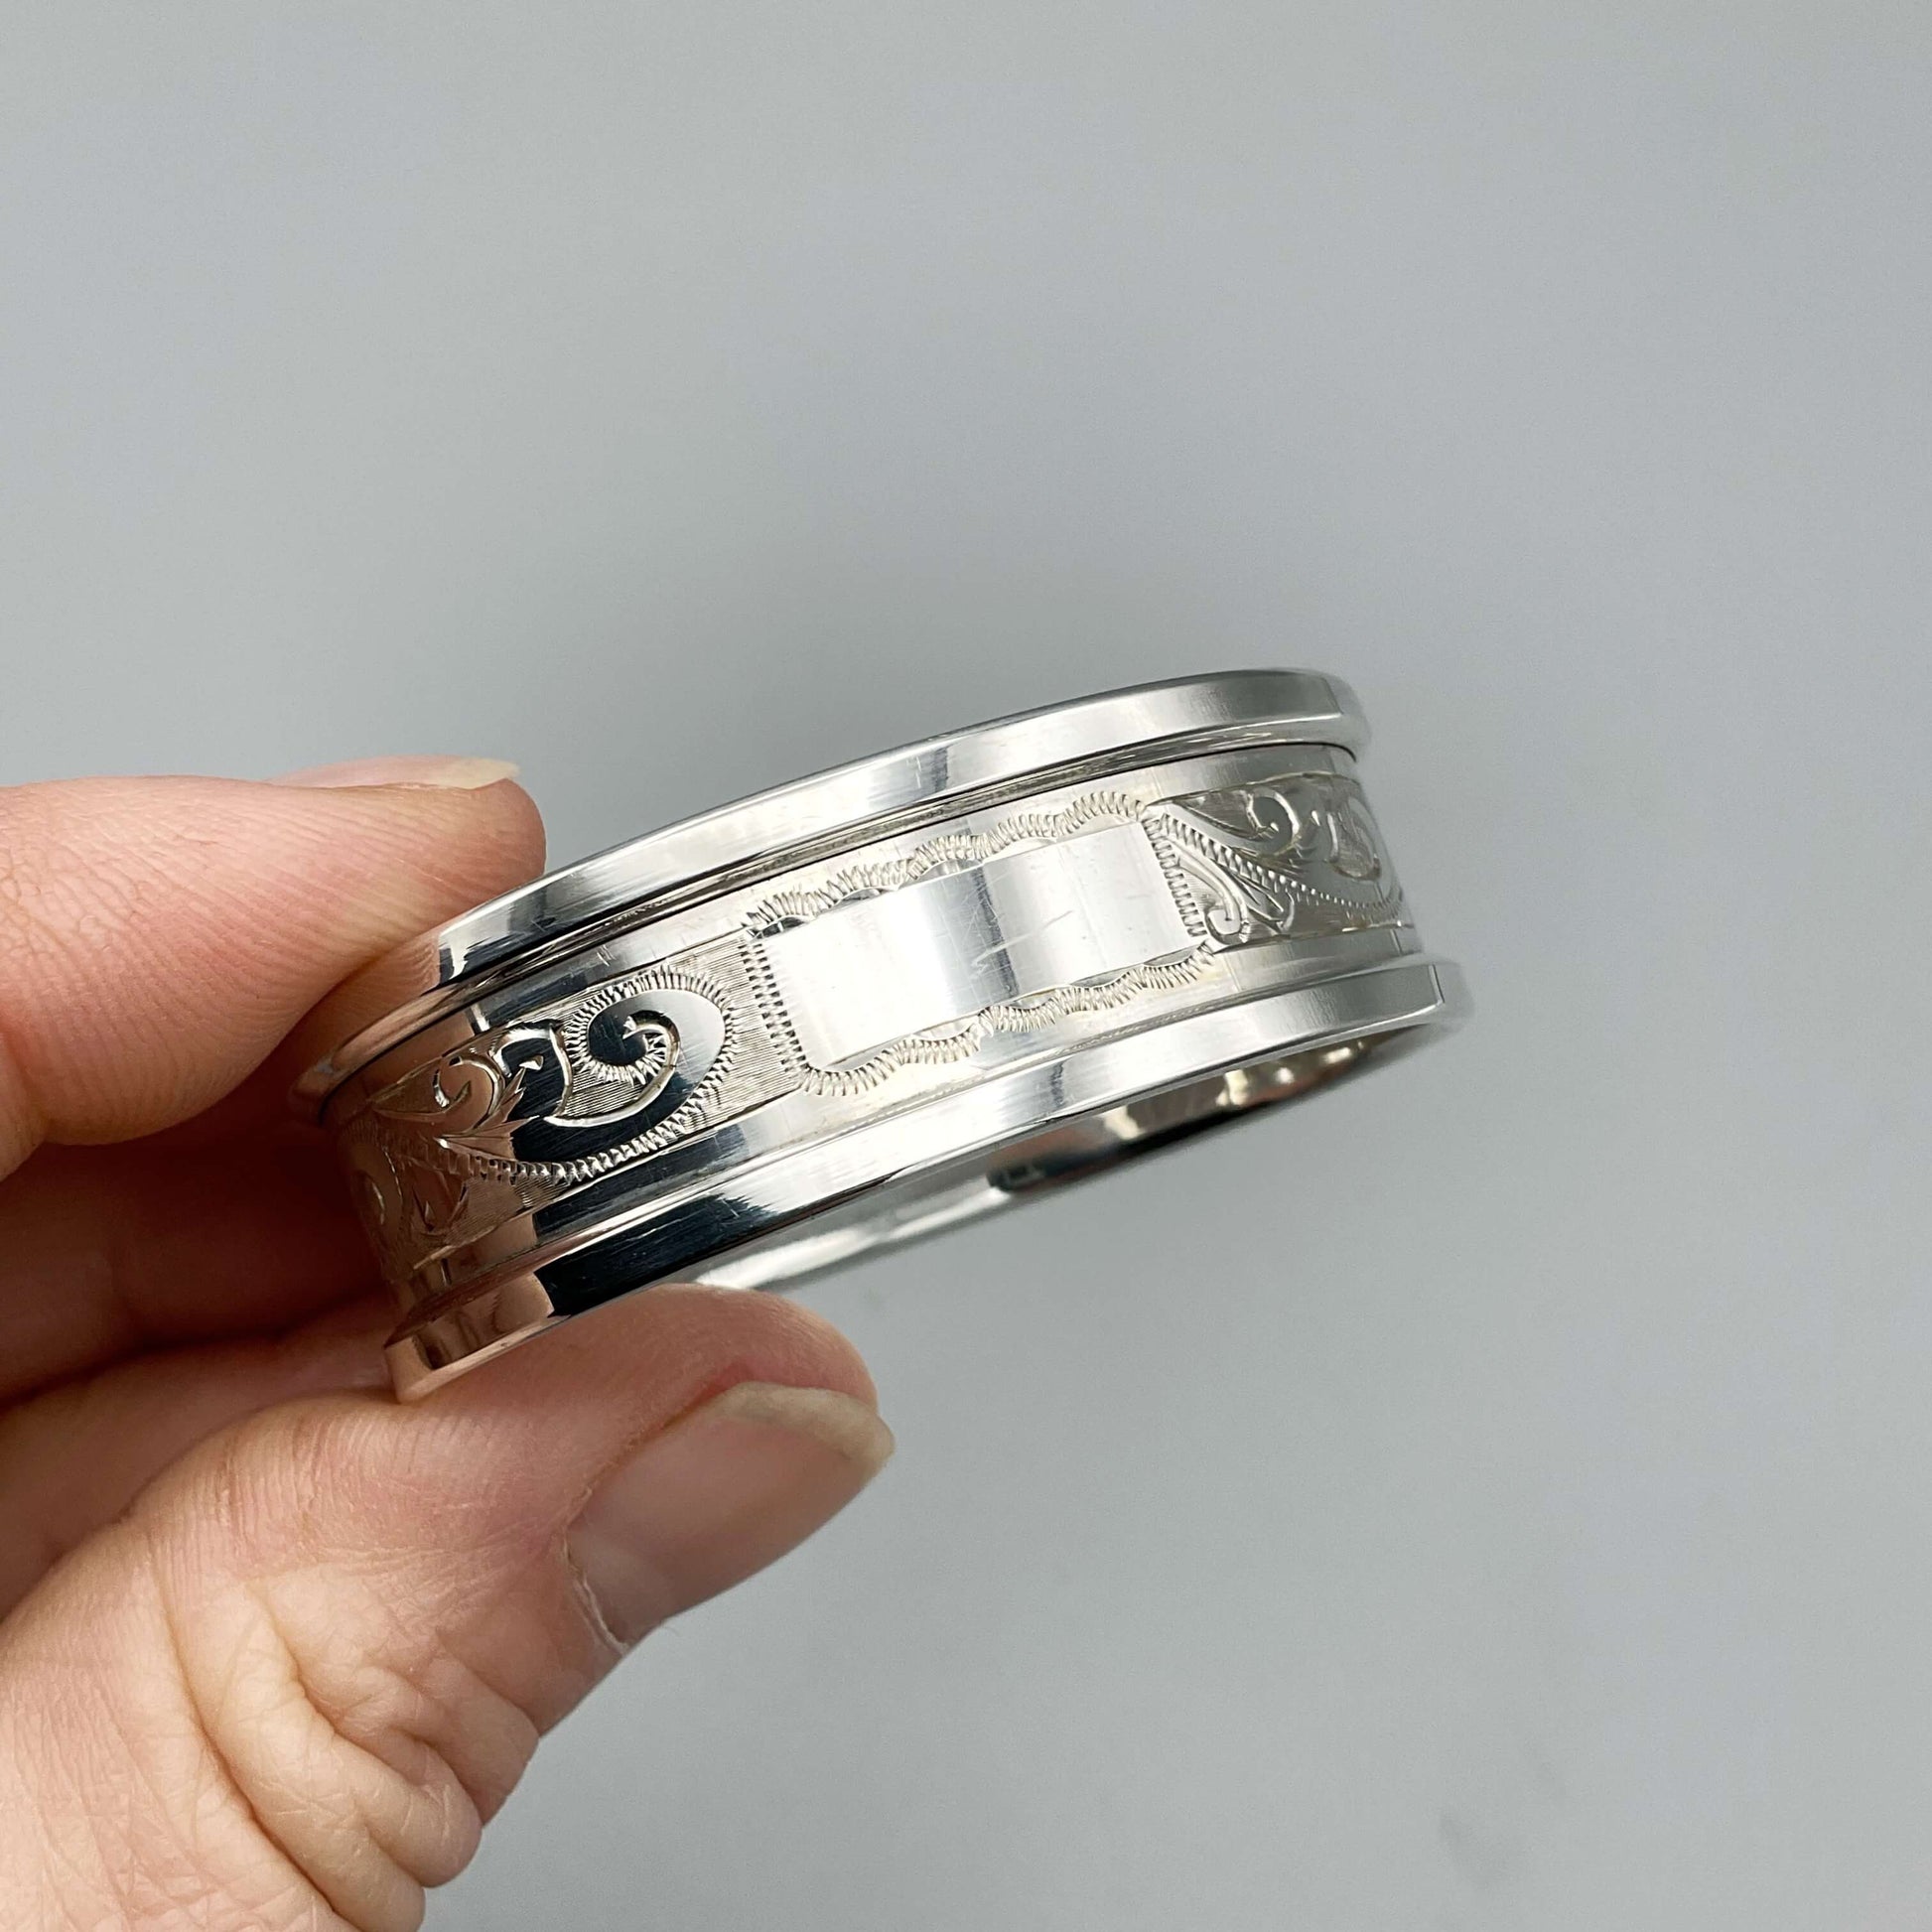 Silver napkin ring with blank rectangular cartouche and etched flower pattern held in fingertips